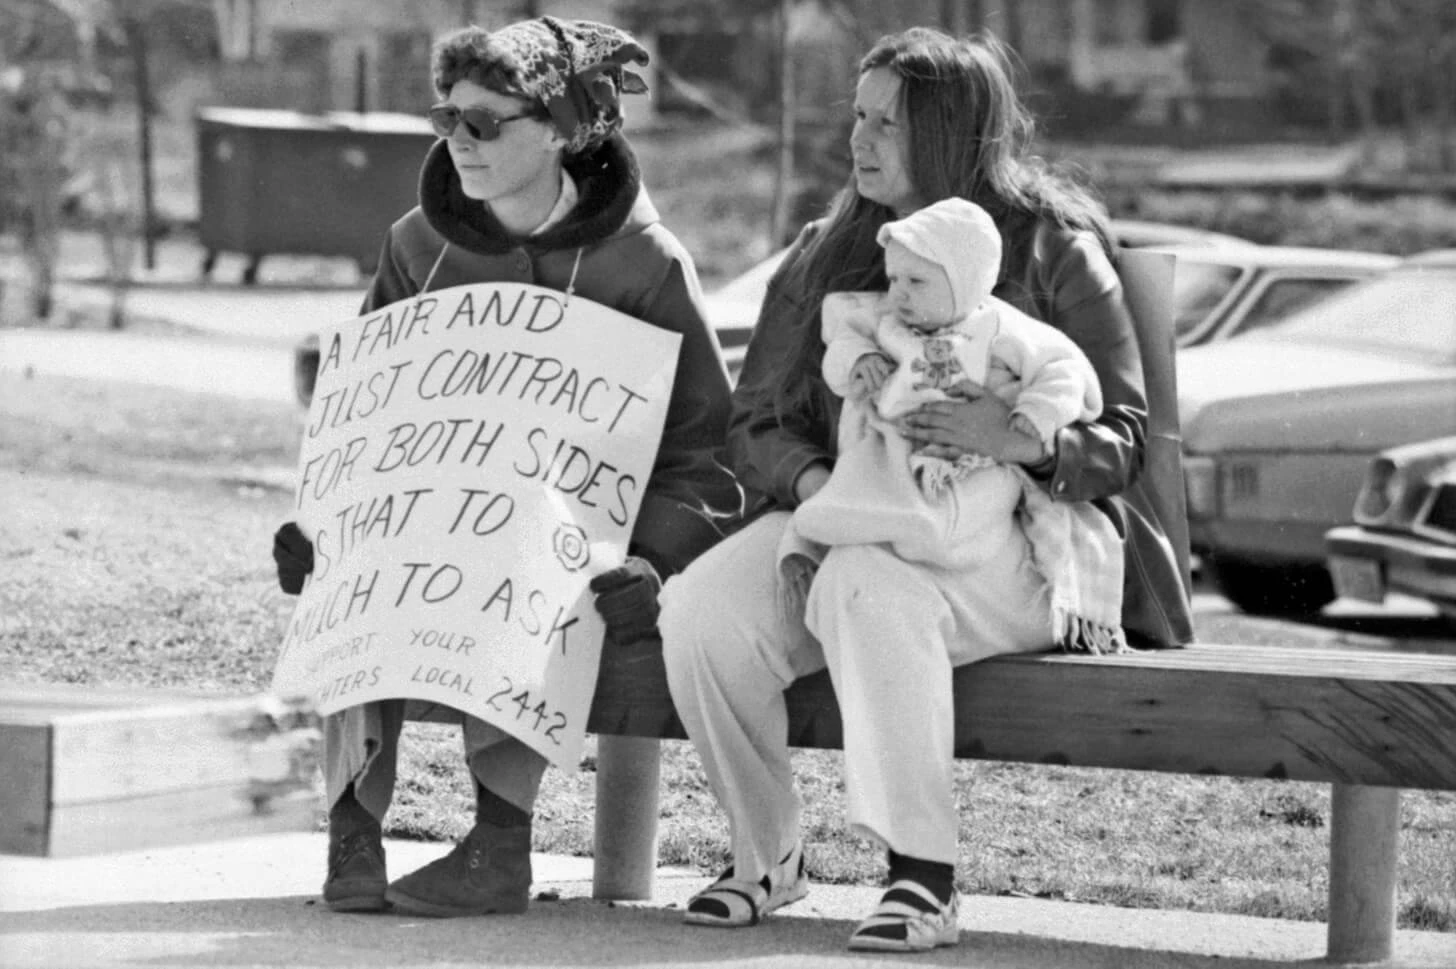 A woman with a posterboard sign around her neck and another woman holding a baby sit on a bench.